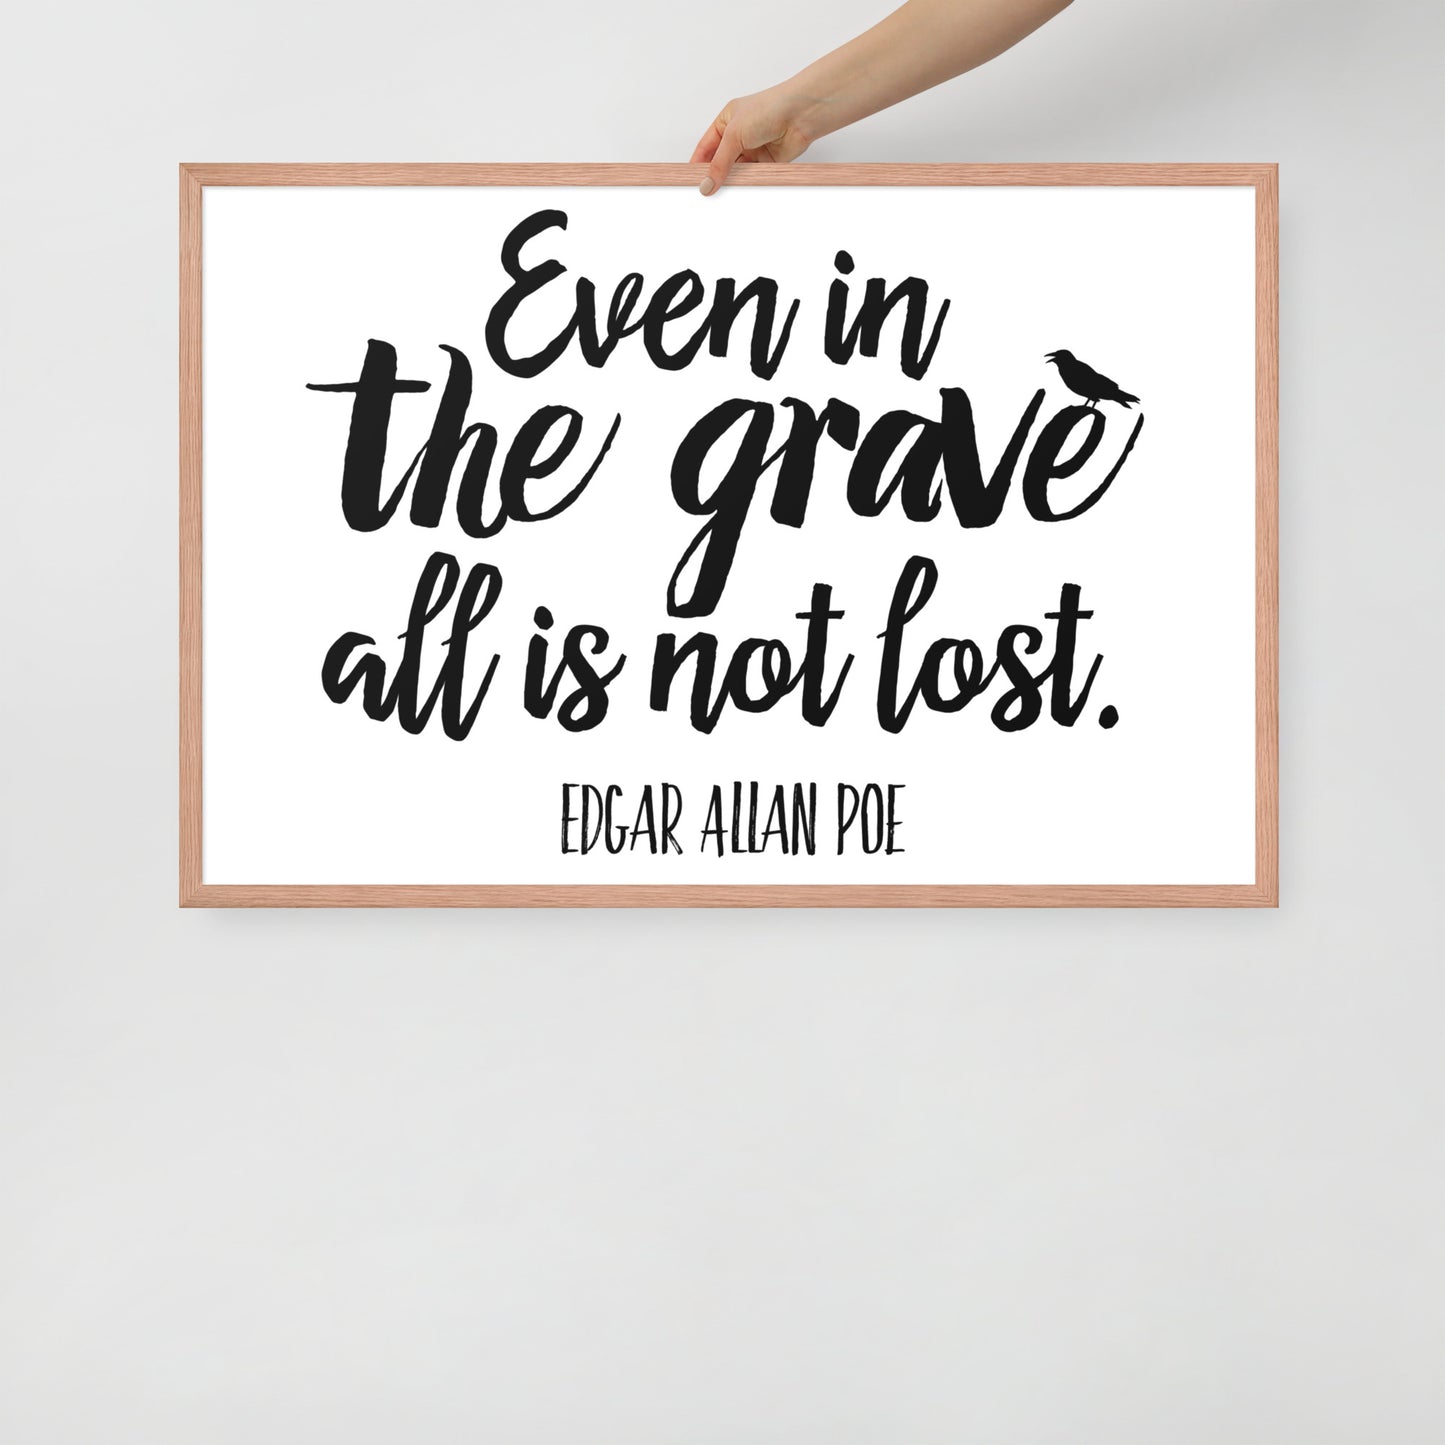 Even in the Grave - Edgar Allan Poe Quote Framed Poster - 24 x 36 Red Oak Frame